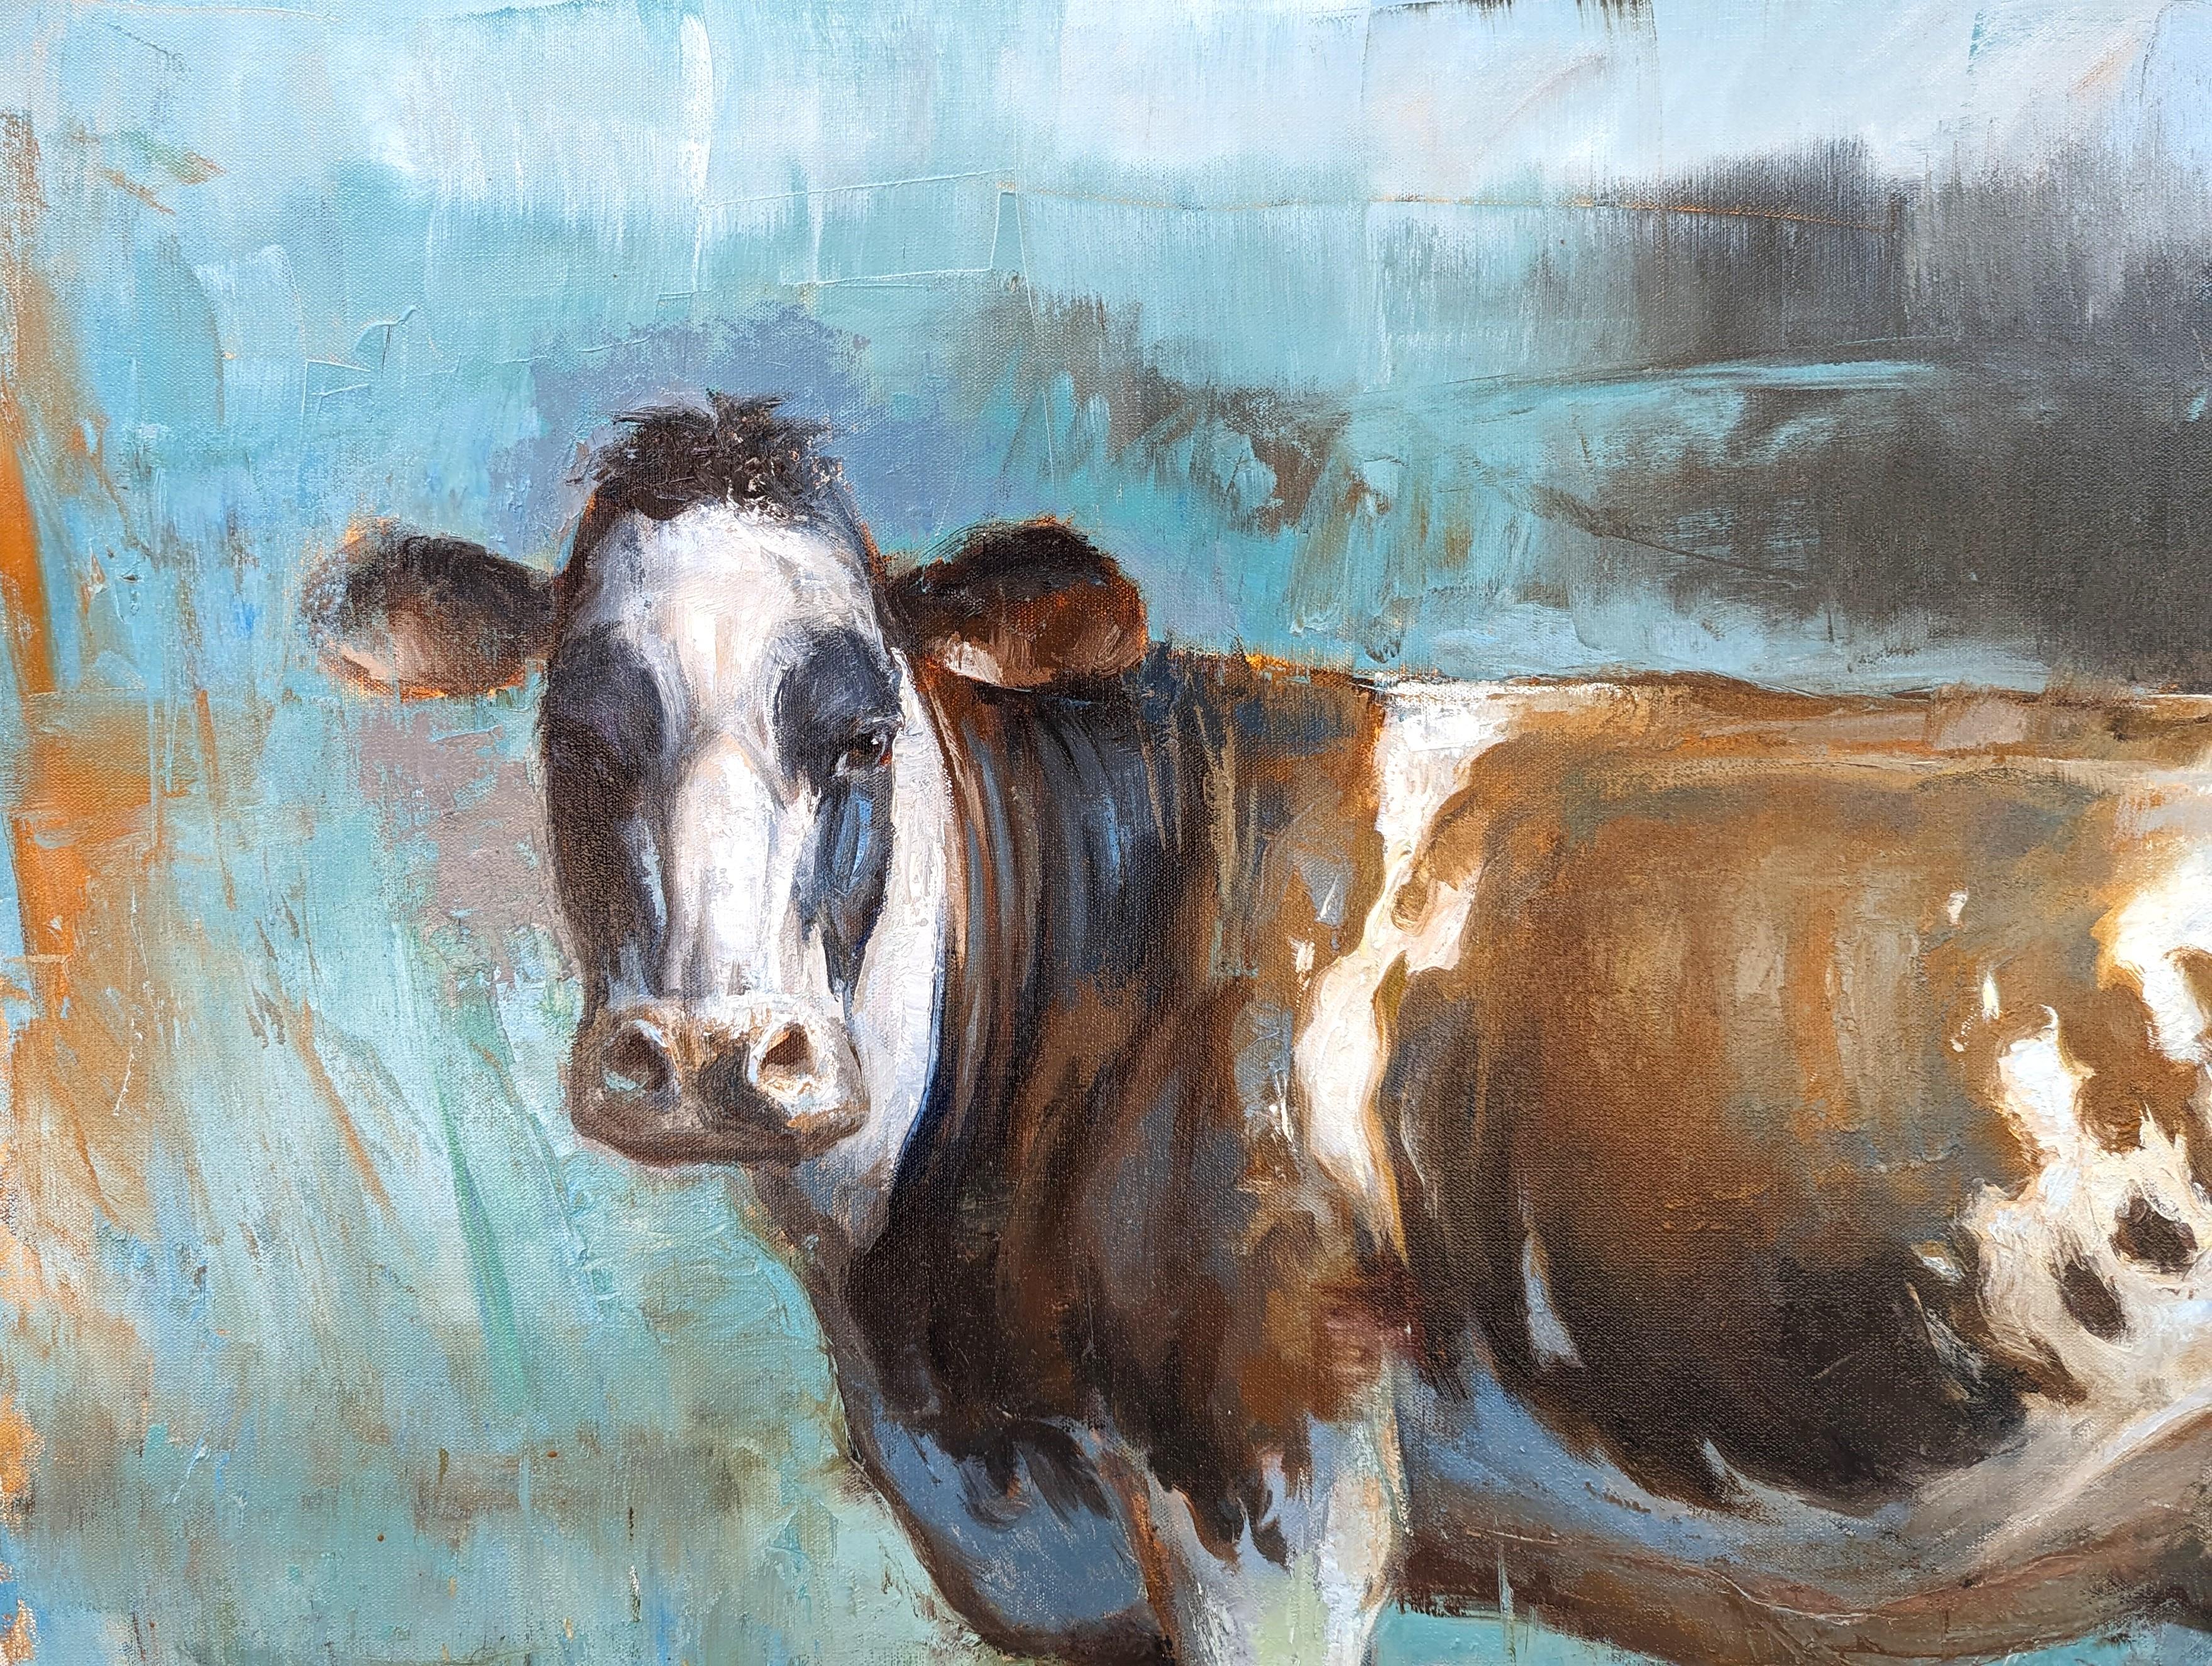 Naturalistic animal painting by contemporary artist Matthew Paoletti. The work features a brown and white spotted cow standing in an abstract green field and set against a blue sky. Signed and dated by the artist in the front lower right corner.